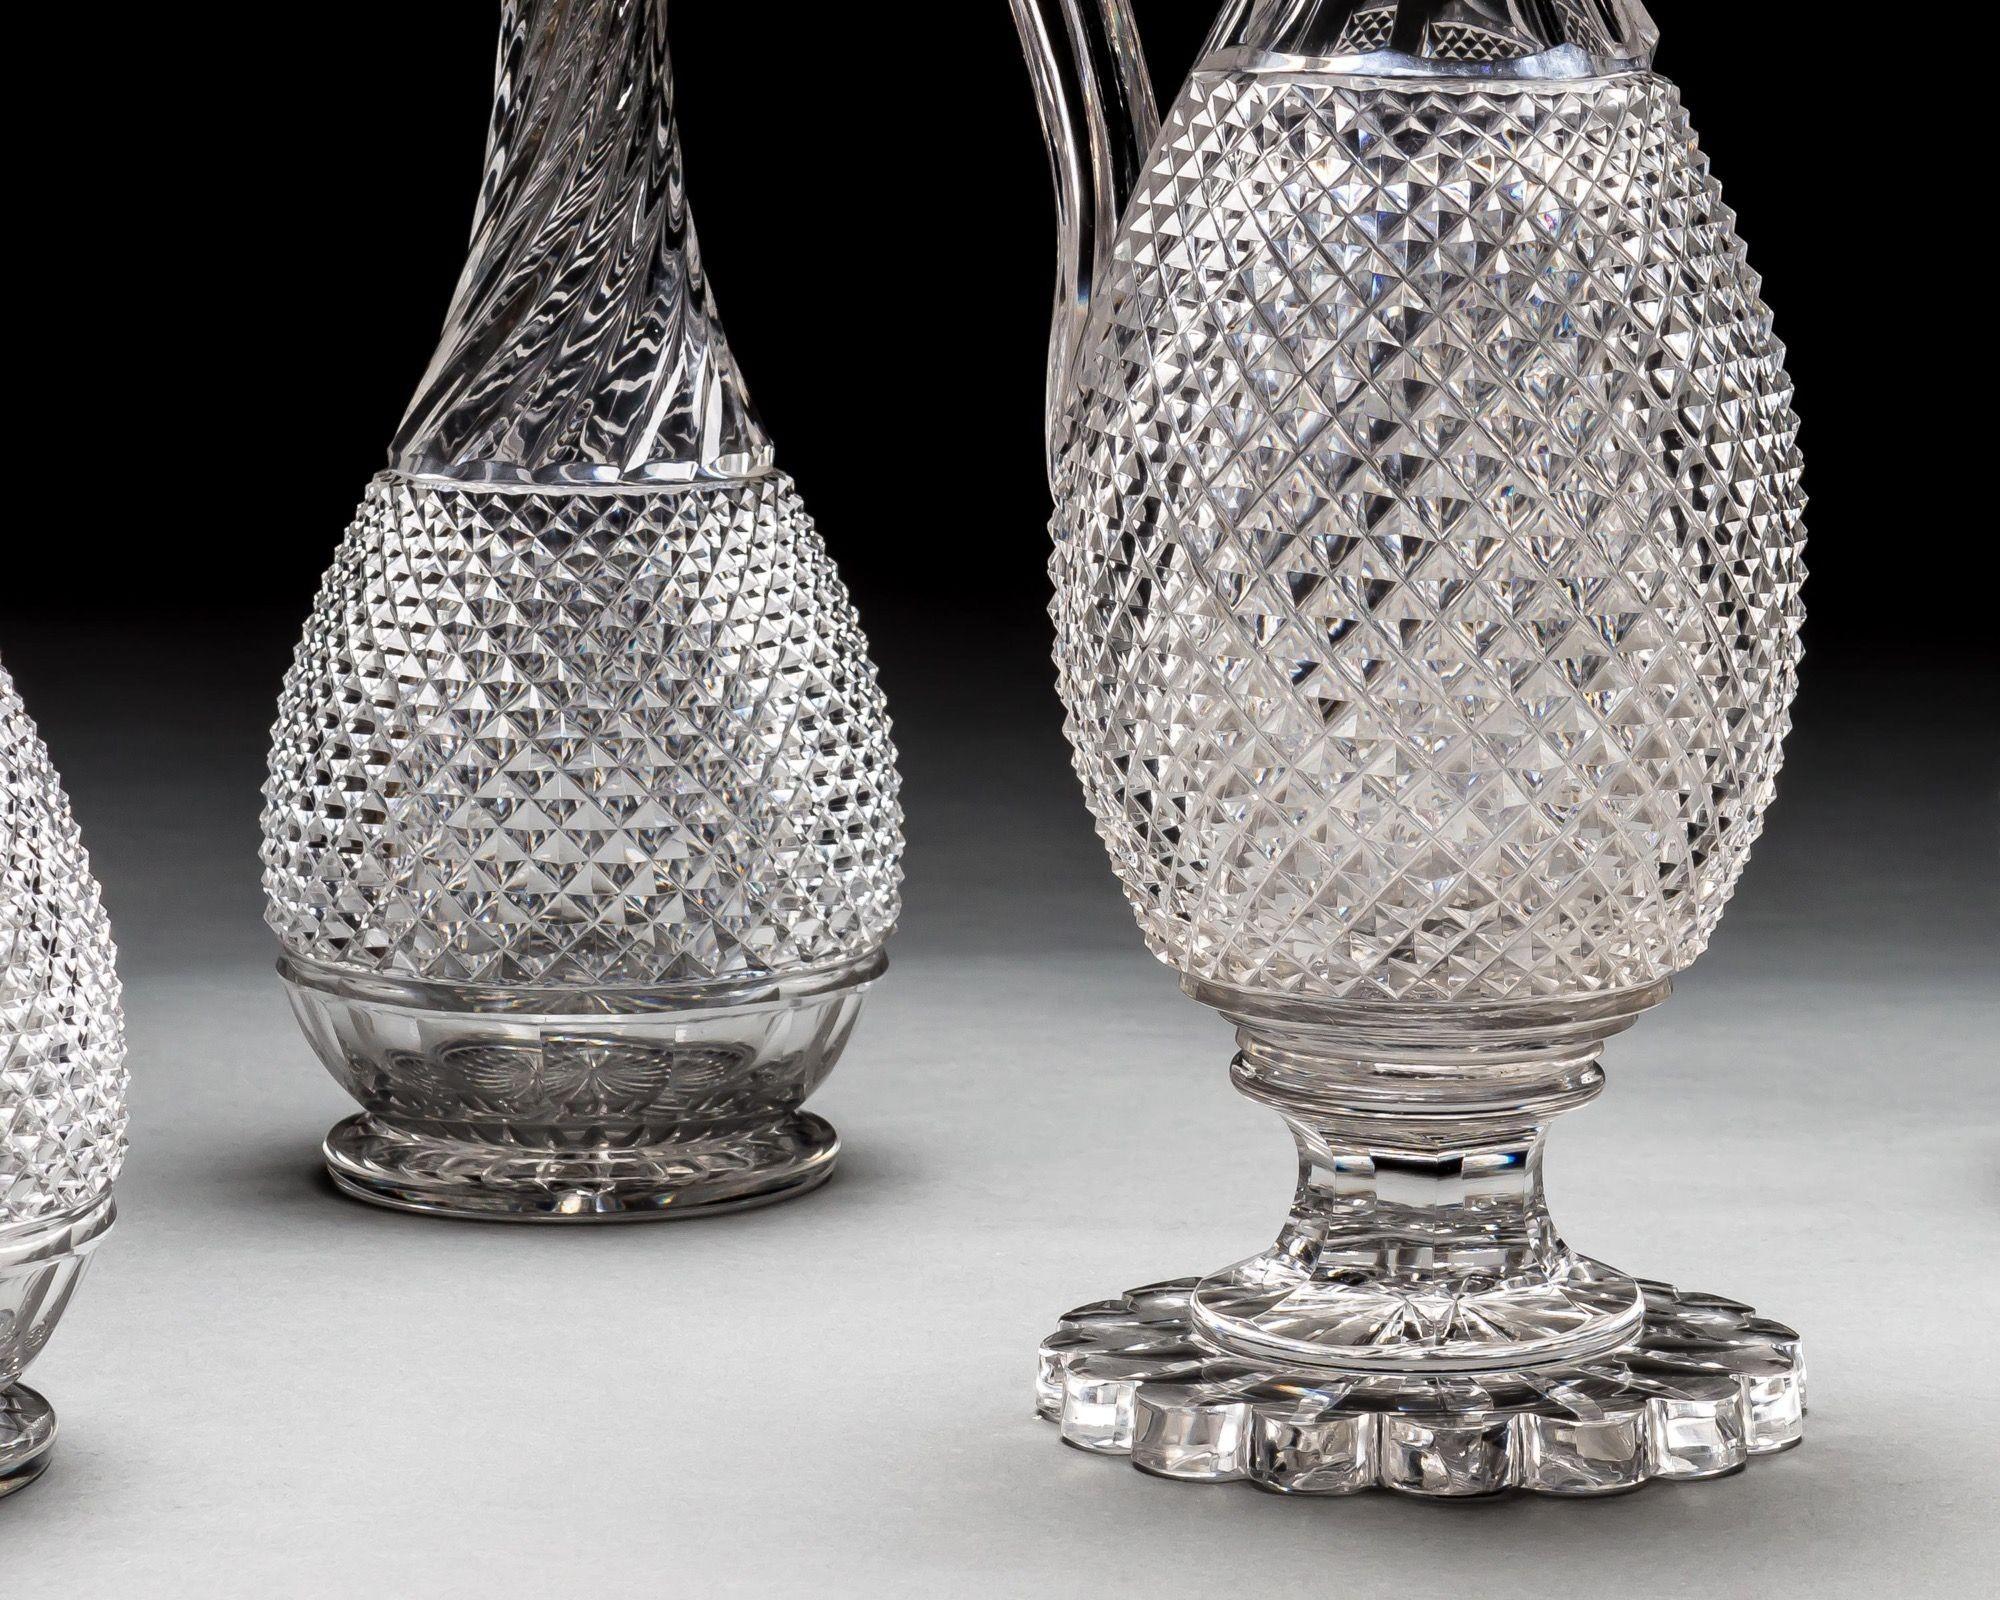 A set of four diamond and swirl cut Victorian decanters with diamond ball stoppers, along with matching wine ewer.
Ewer Dimensions:
Height - 34cm
Width - 16.5cm